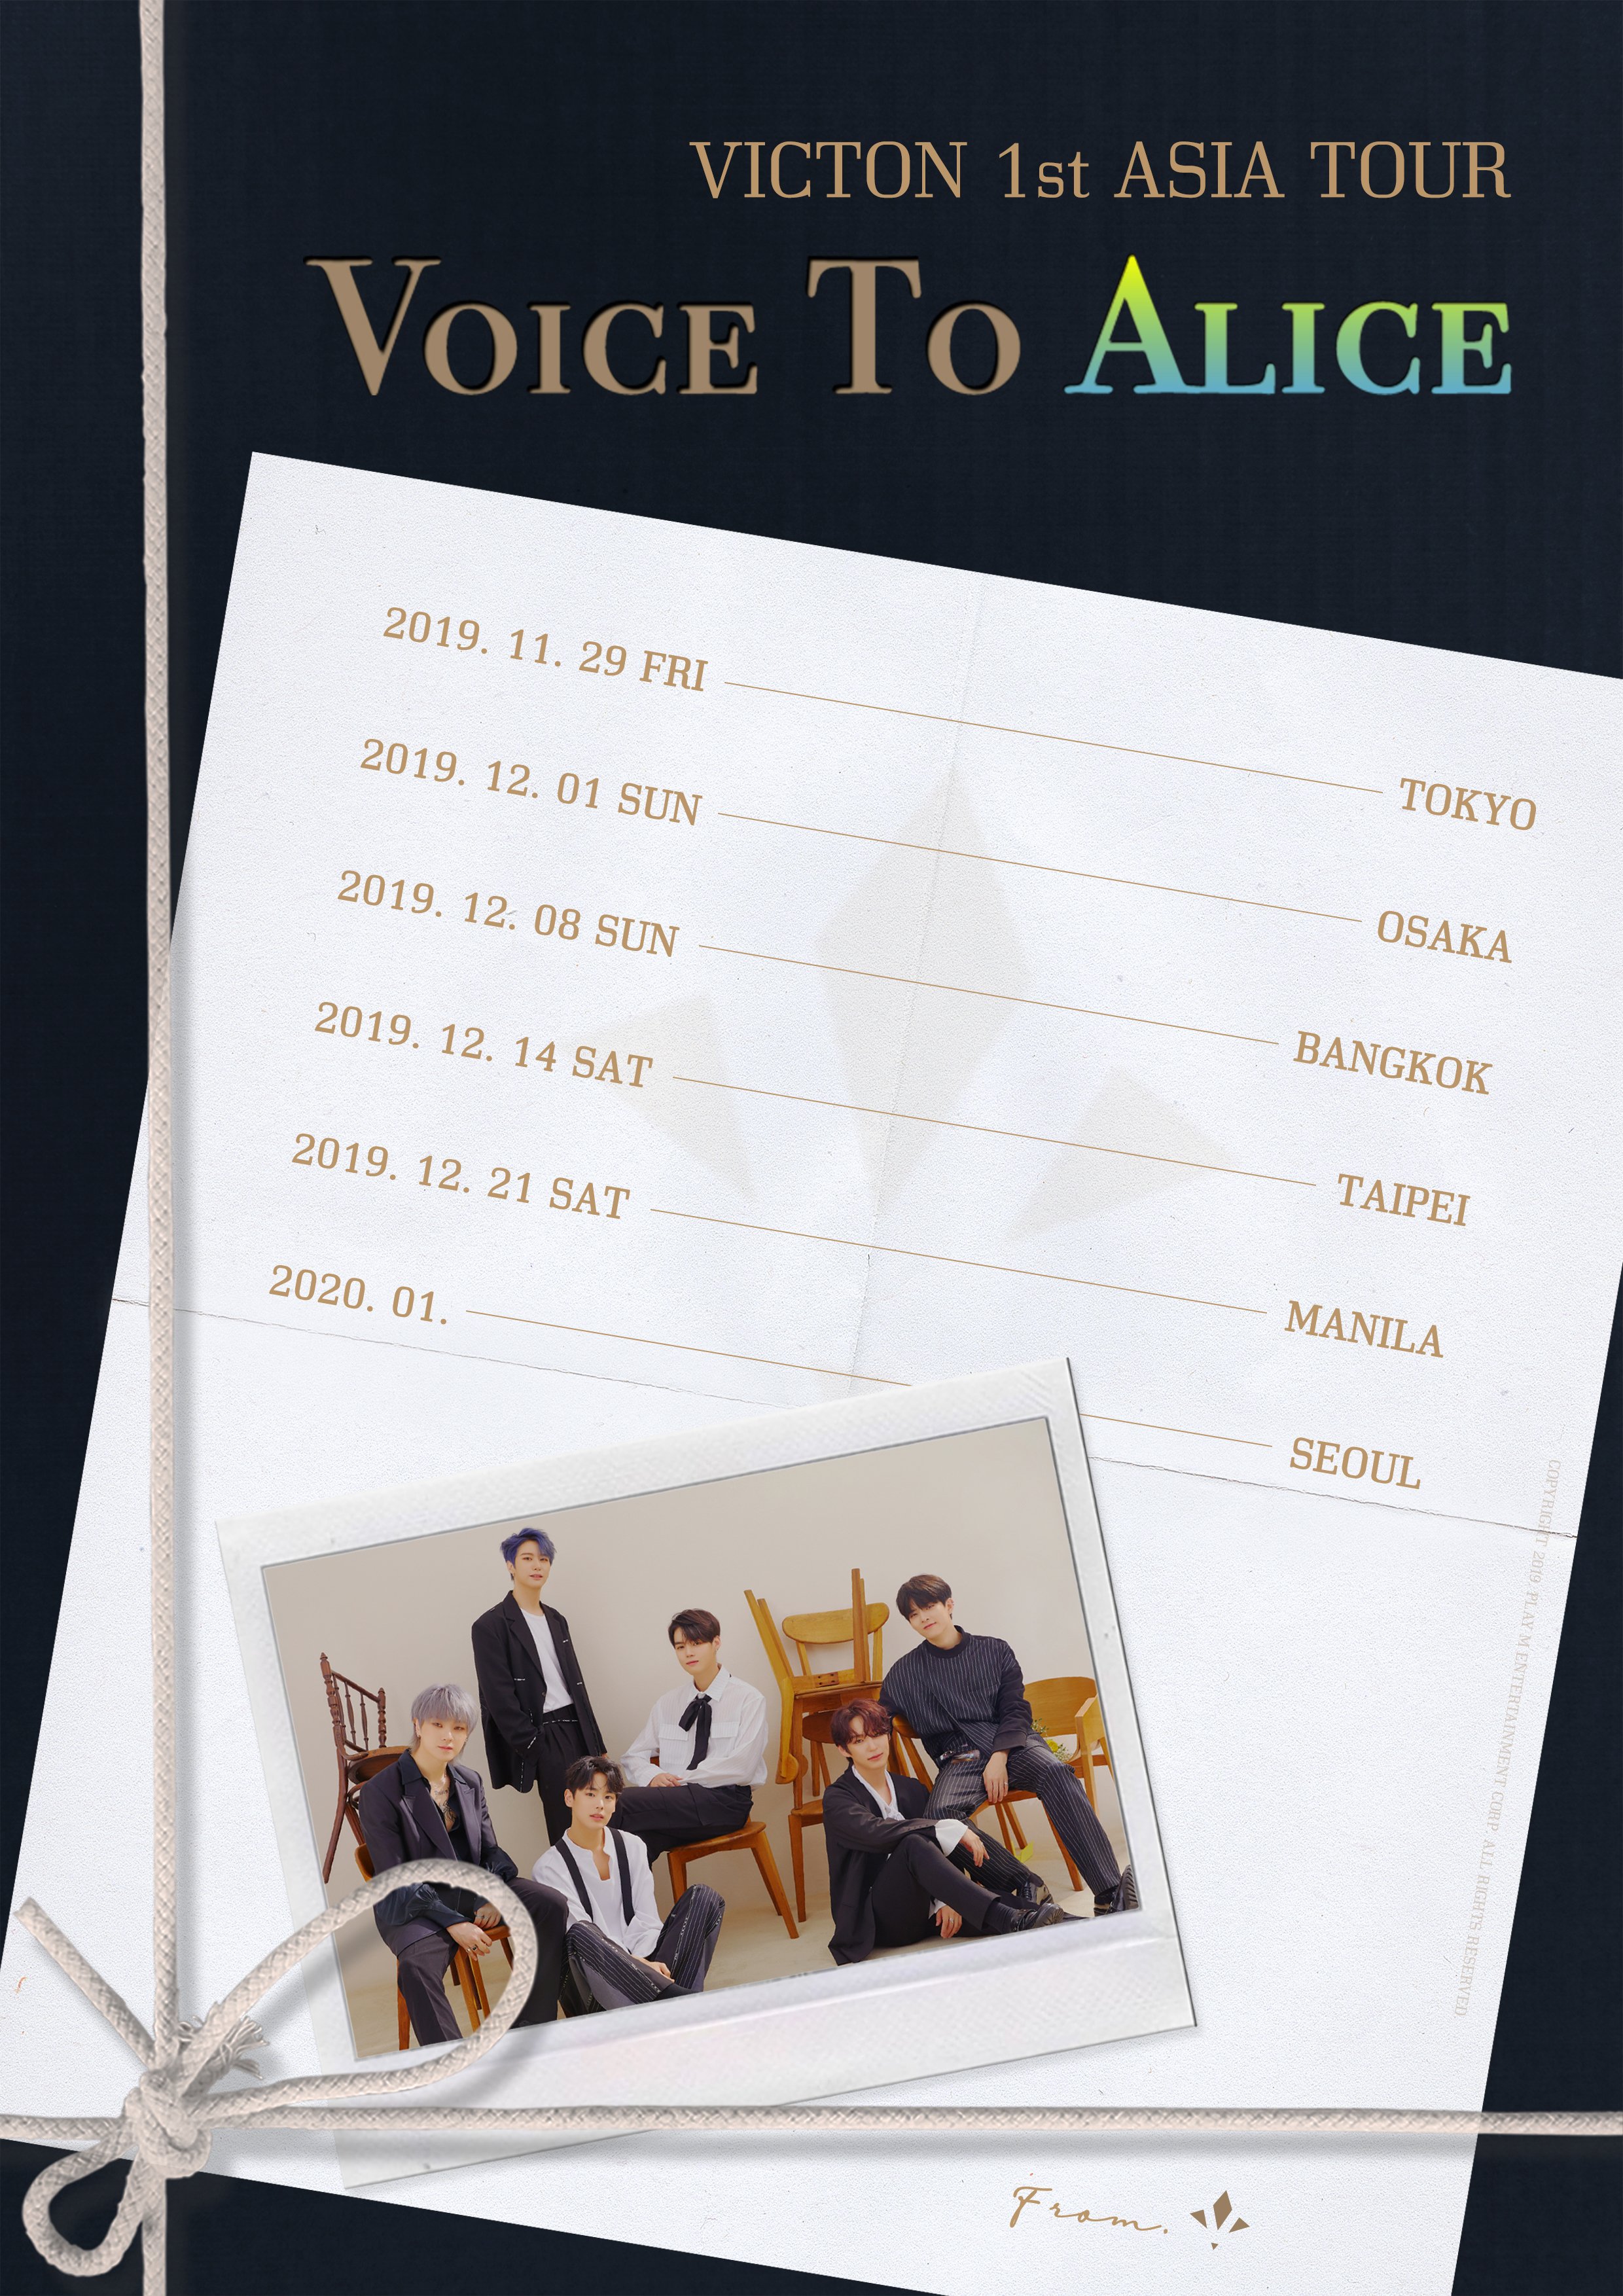 VICTON 1st ASIA TOUR [VOICE TO ALICE]: Cities And Ticket Details | Kpopmap